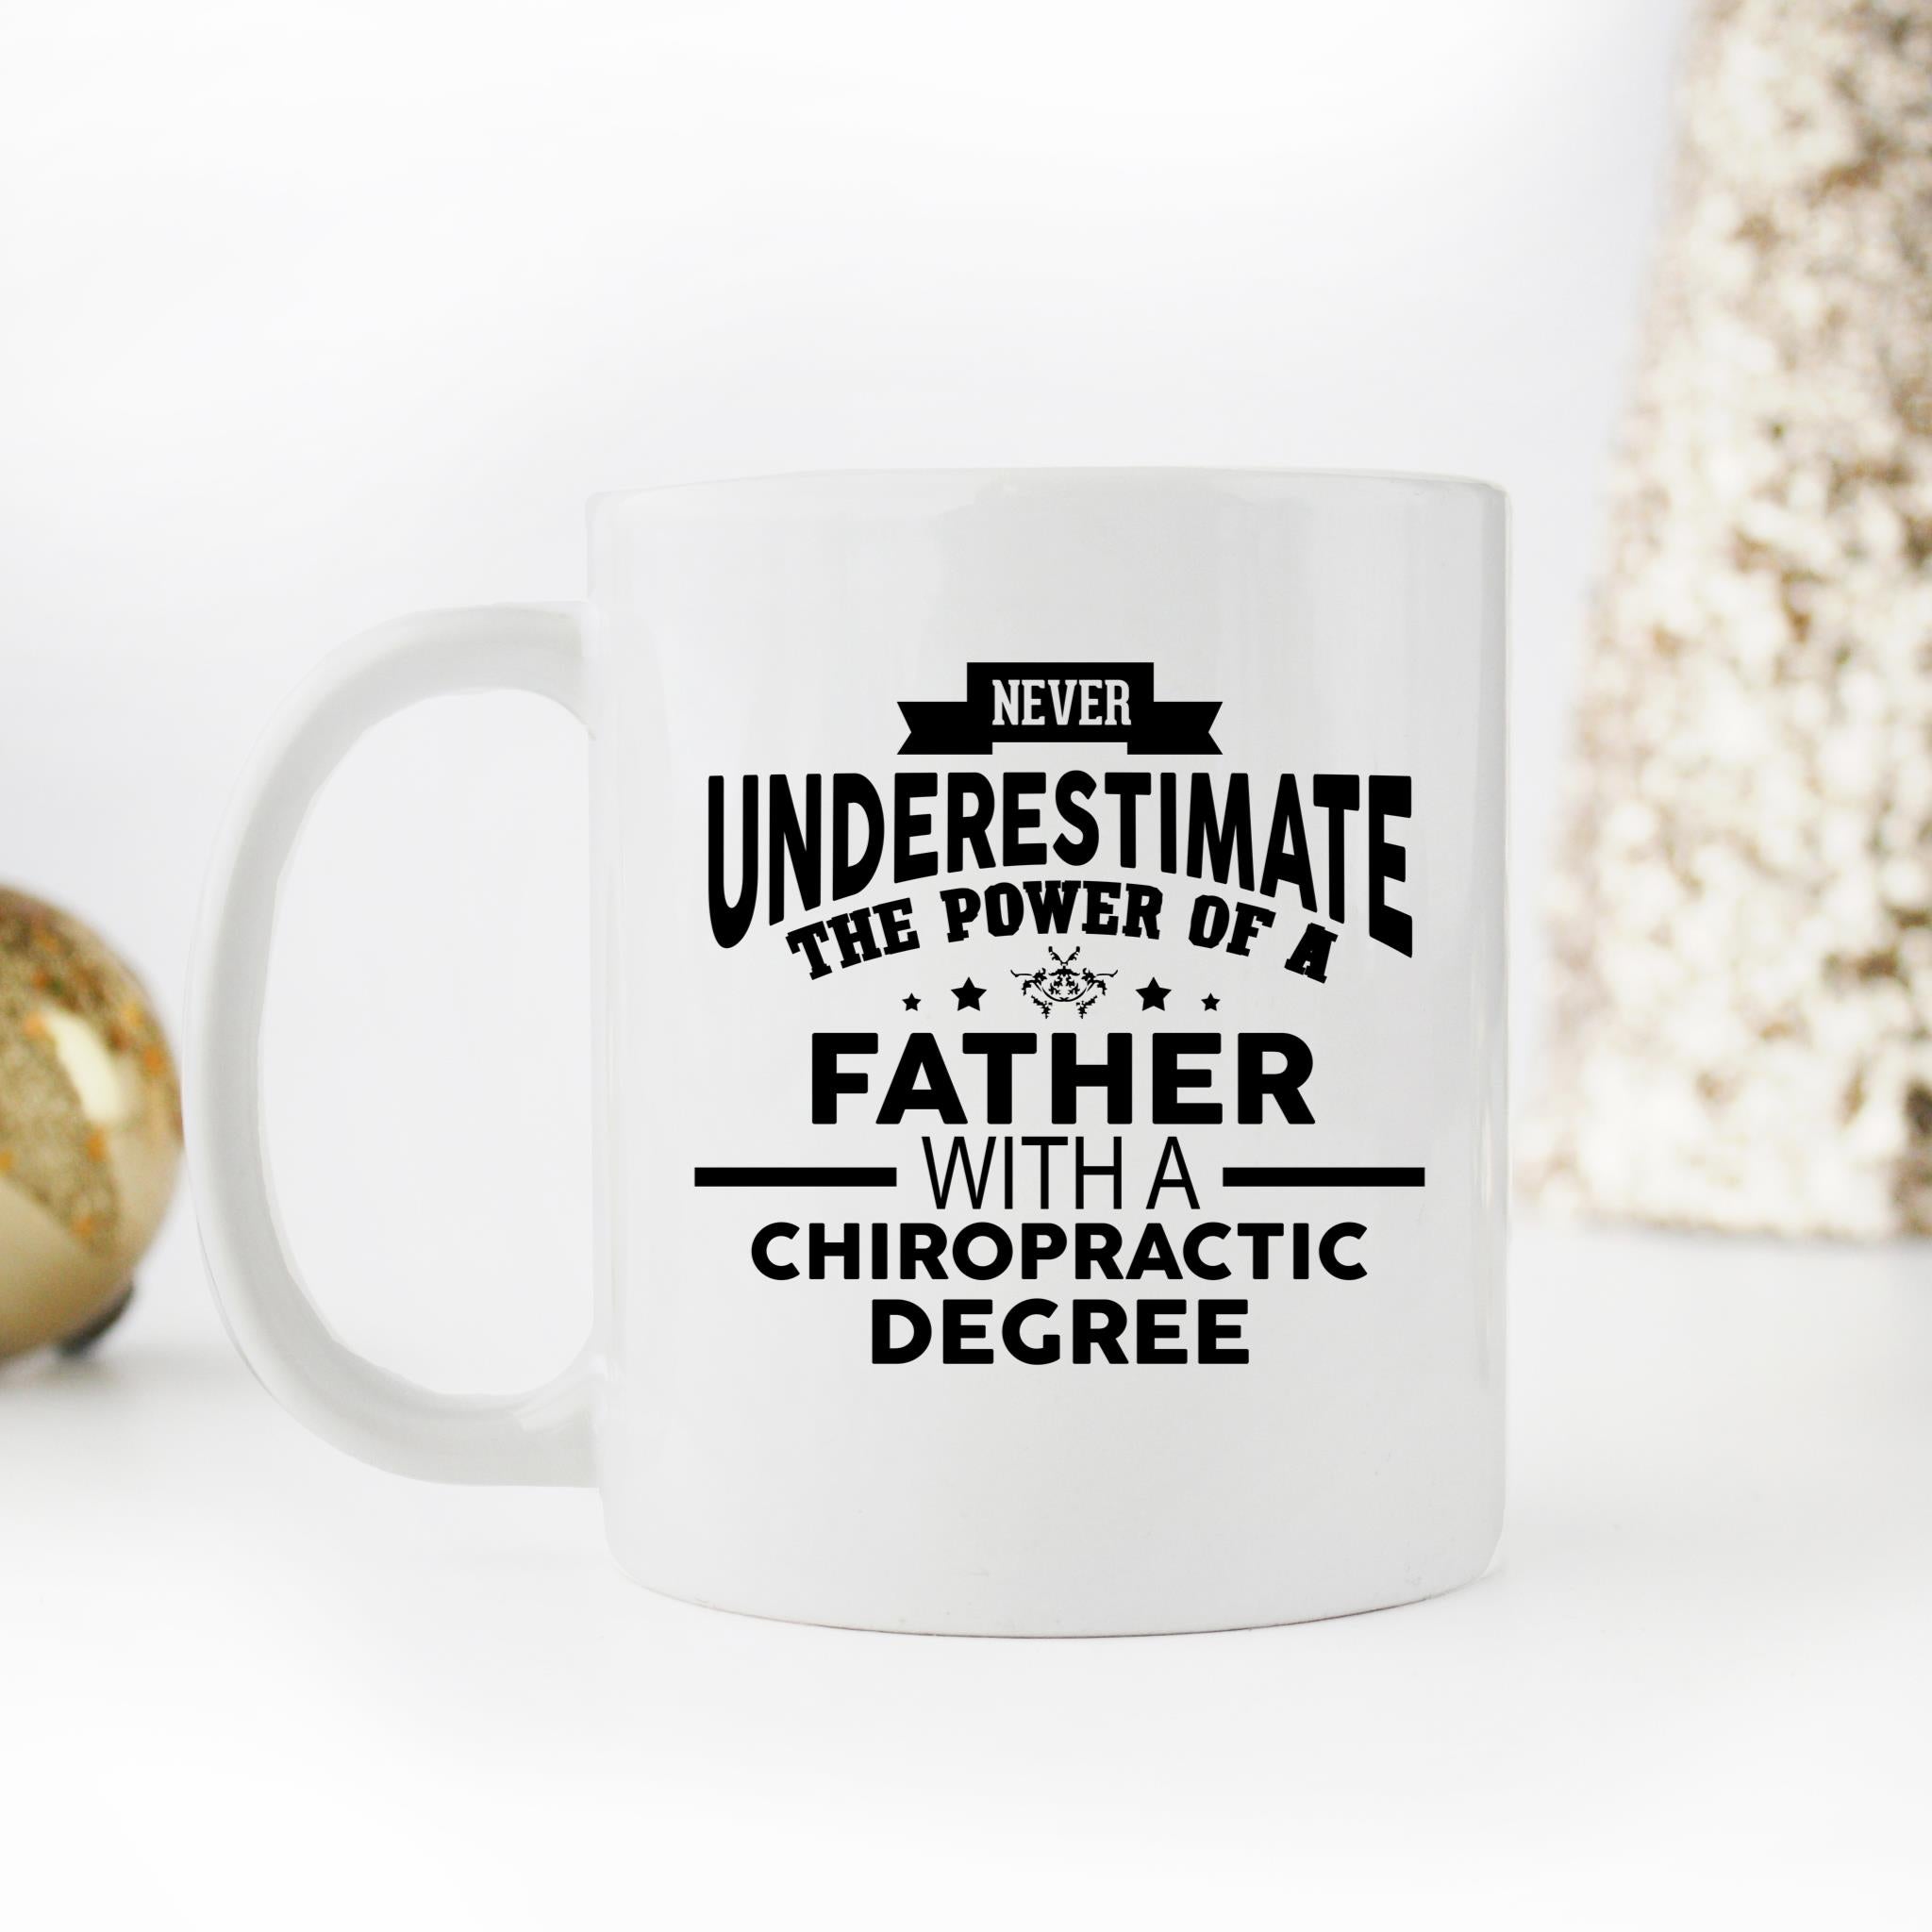 Skitongifts Funny Ceramic Novelty Coffee Mug Chiropractic Never Underestimate The Power Of A Father With A Chiropractic Degree W1VMJY0